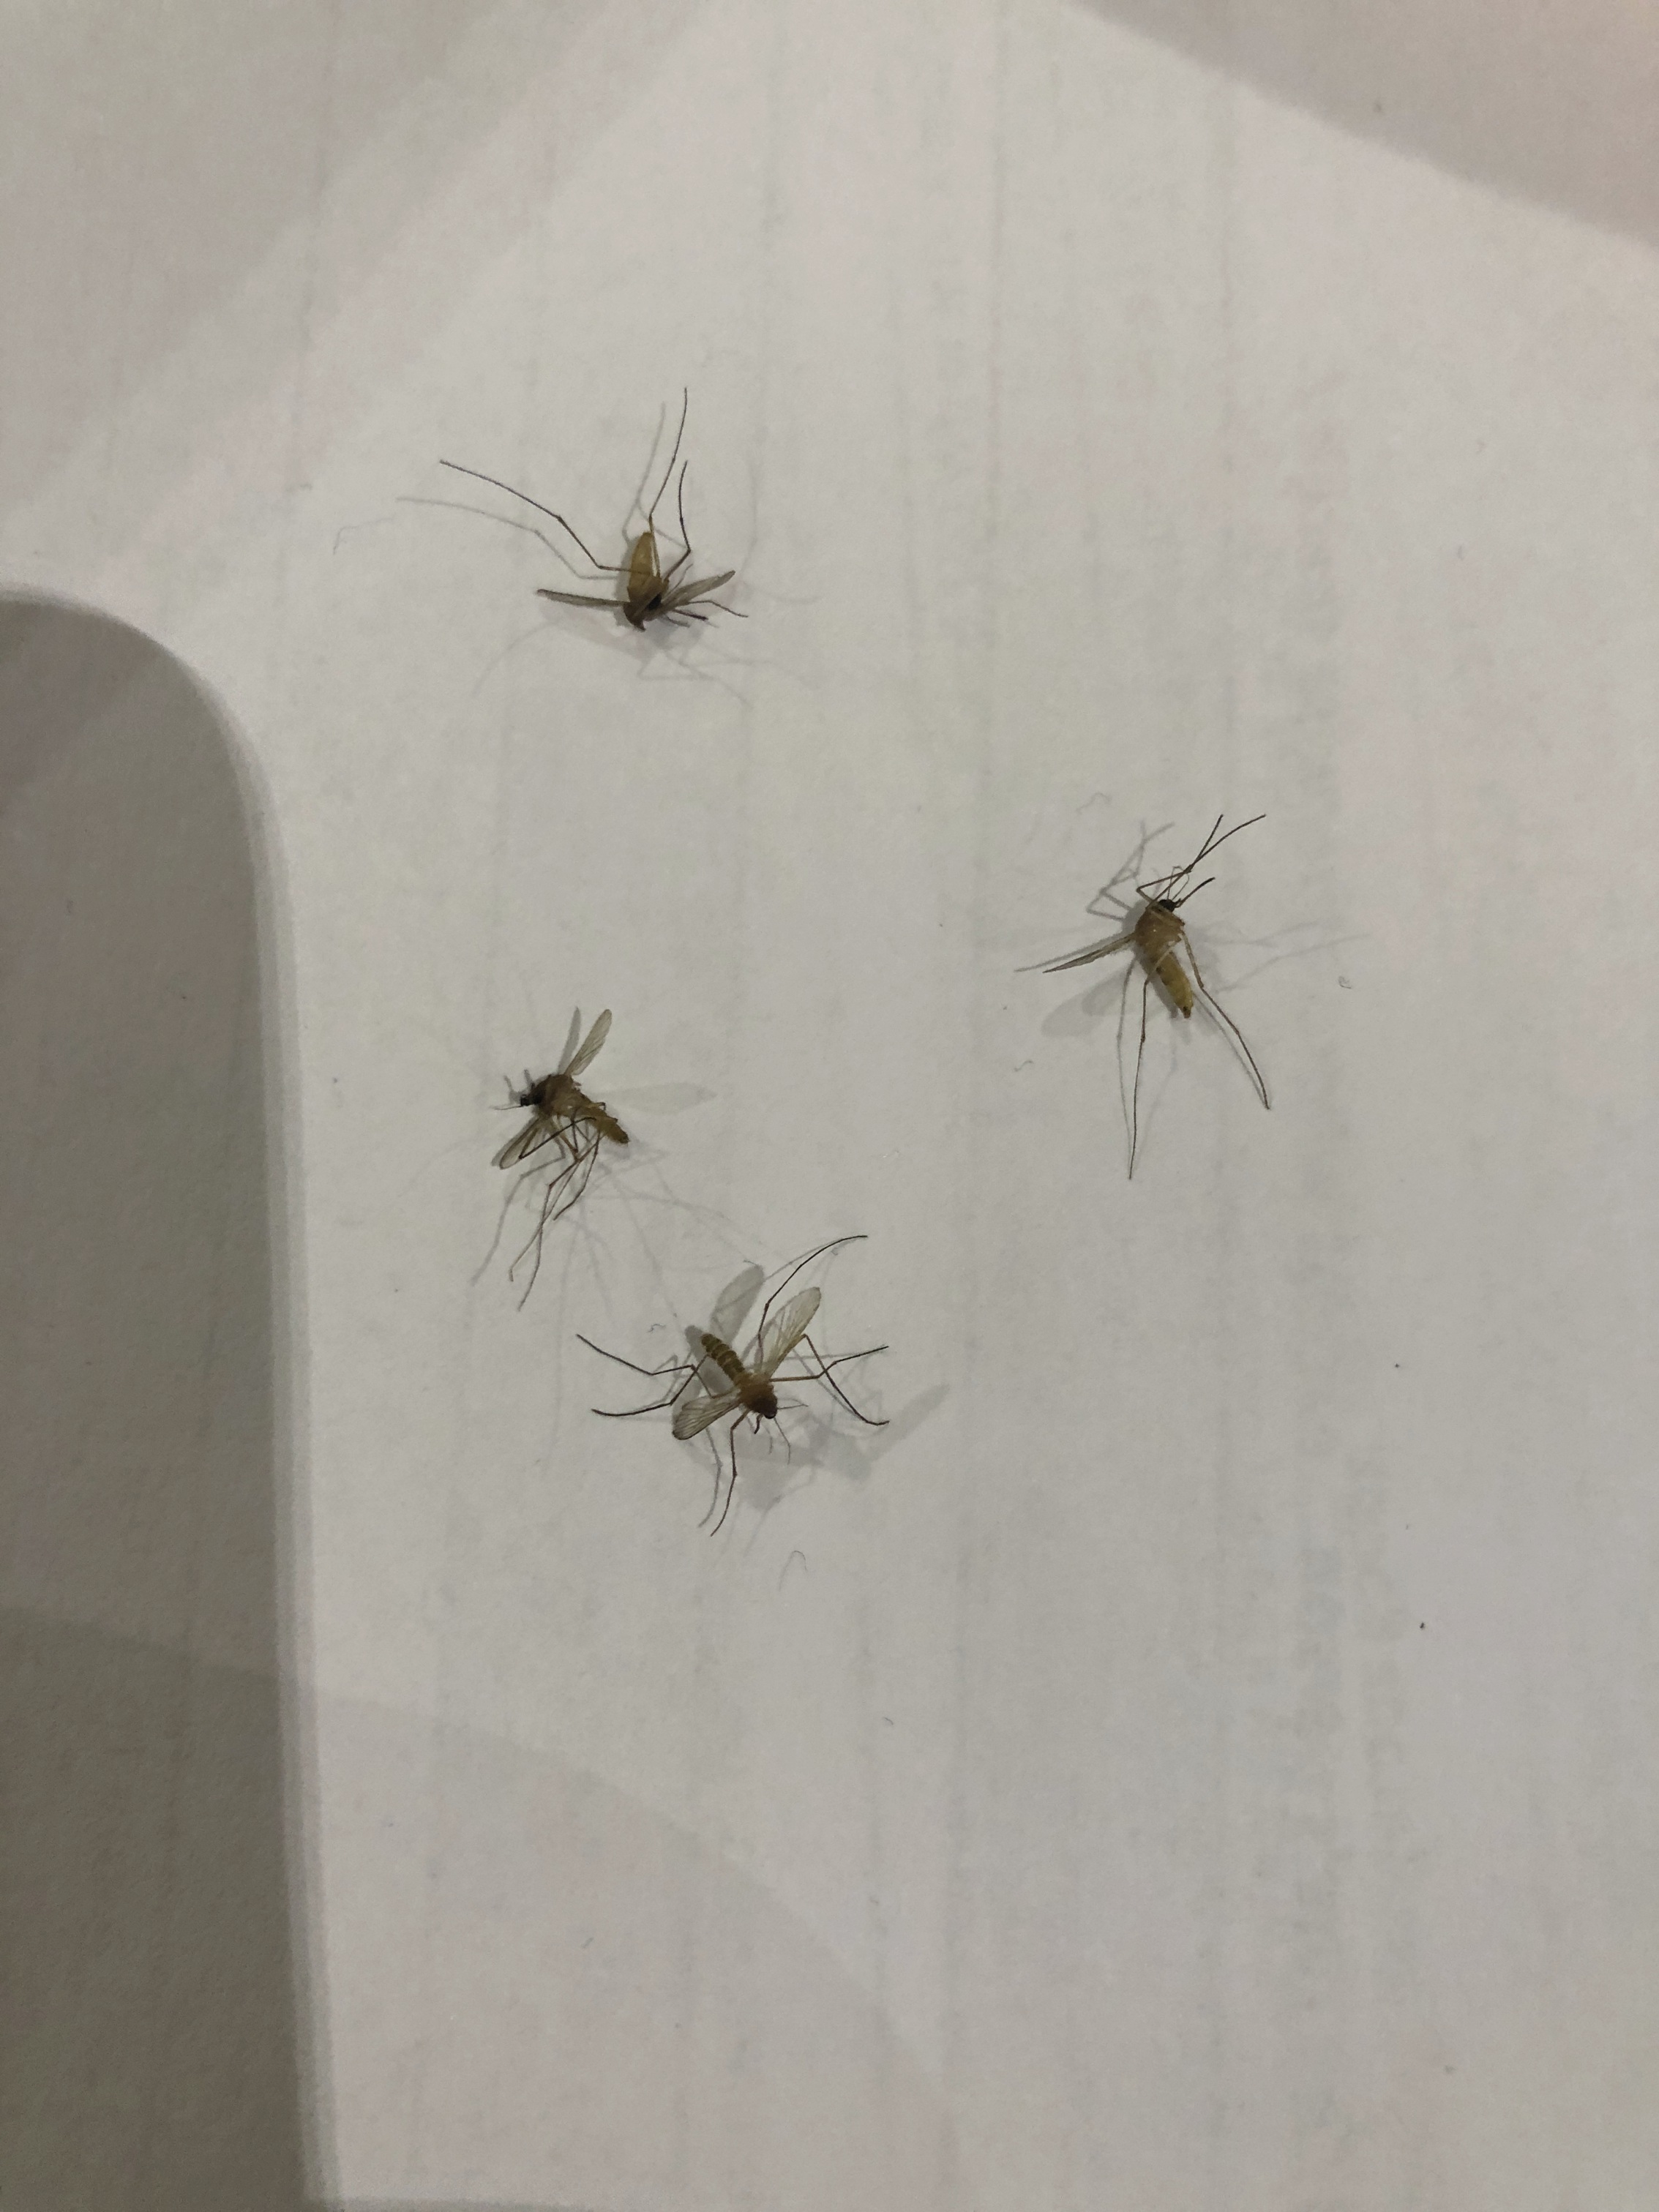 Four mosquitoes which one passenger managed to catch within 30 minutes at the Airport (26824646)